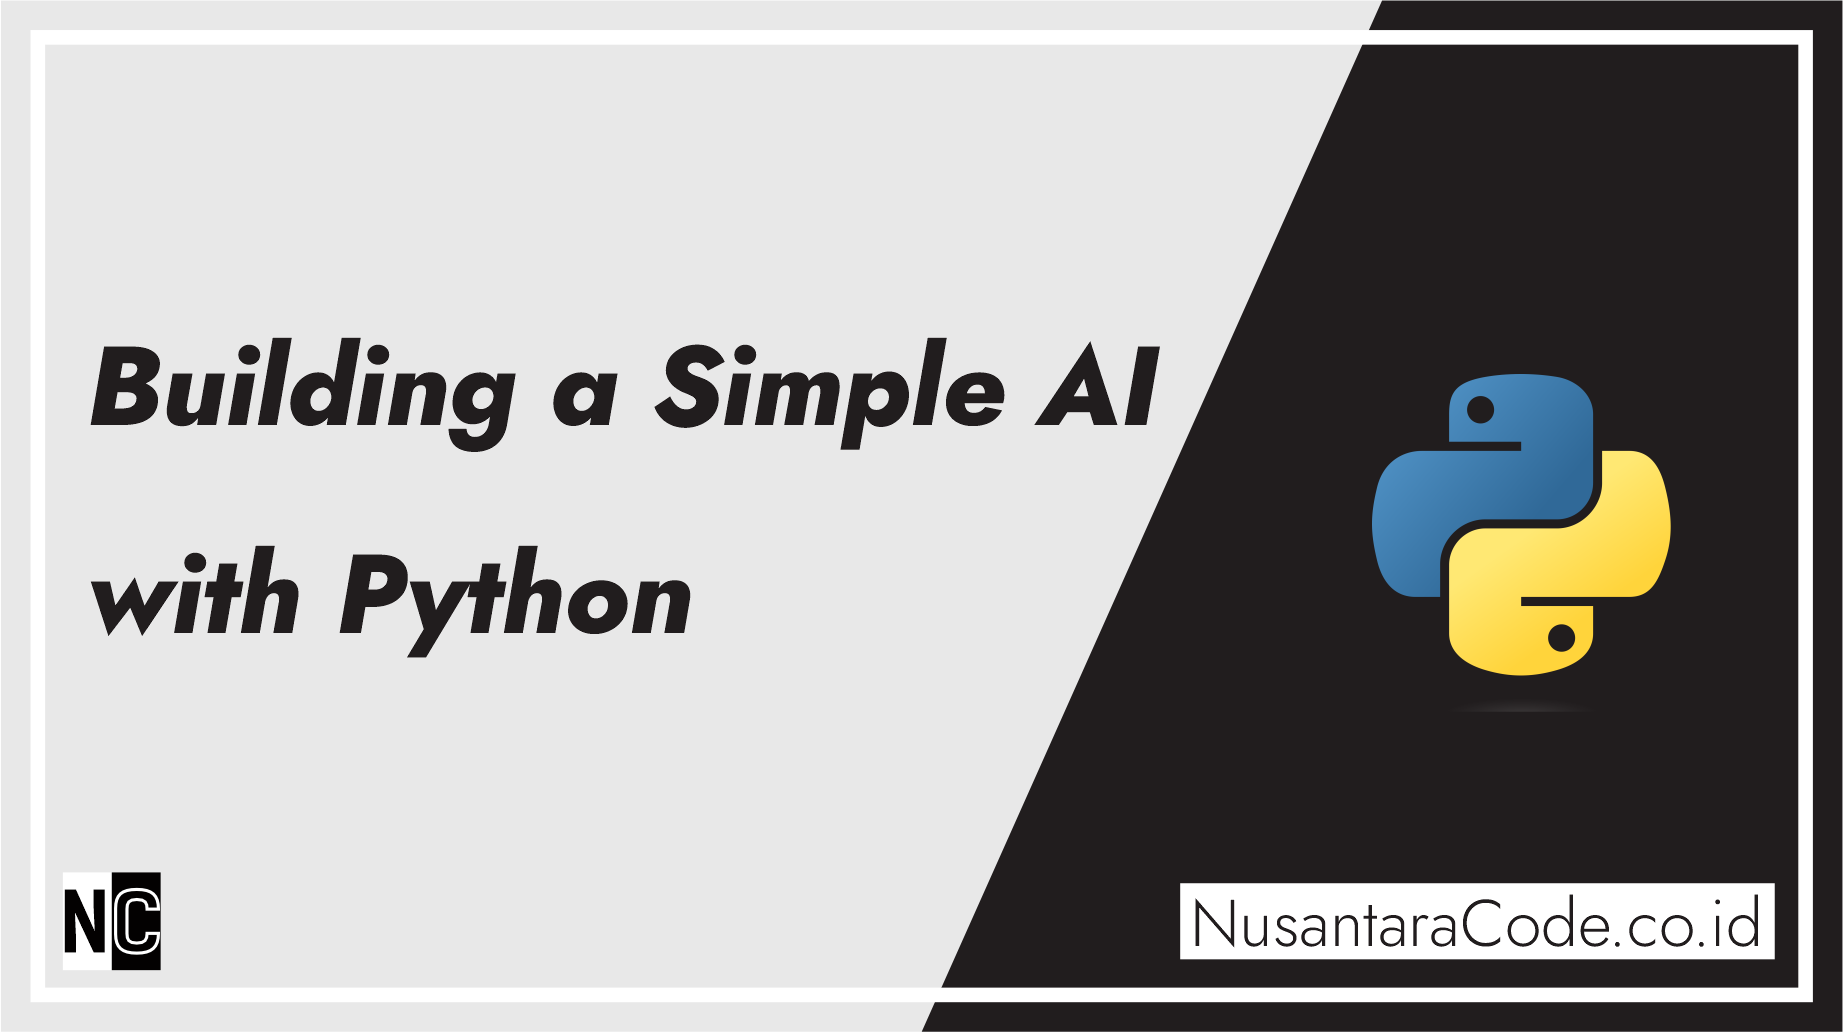 Building a Simple AI with Python